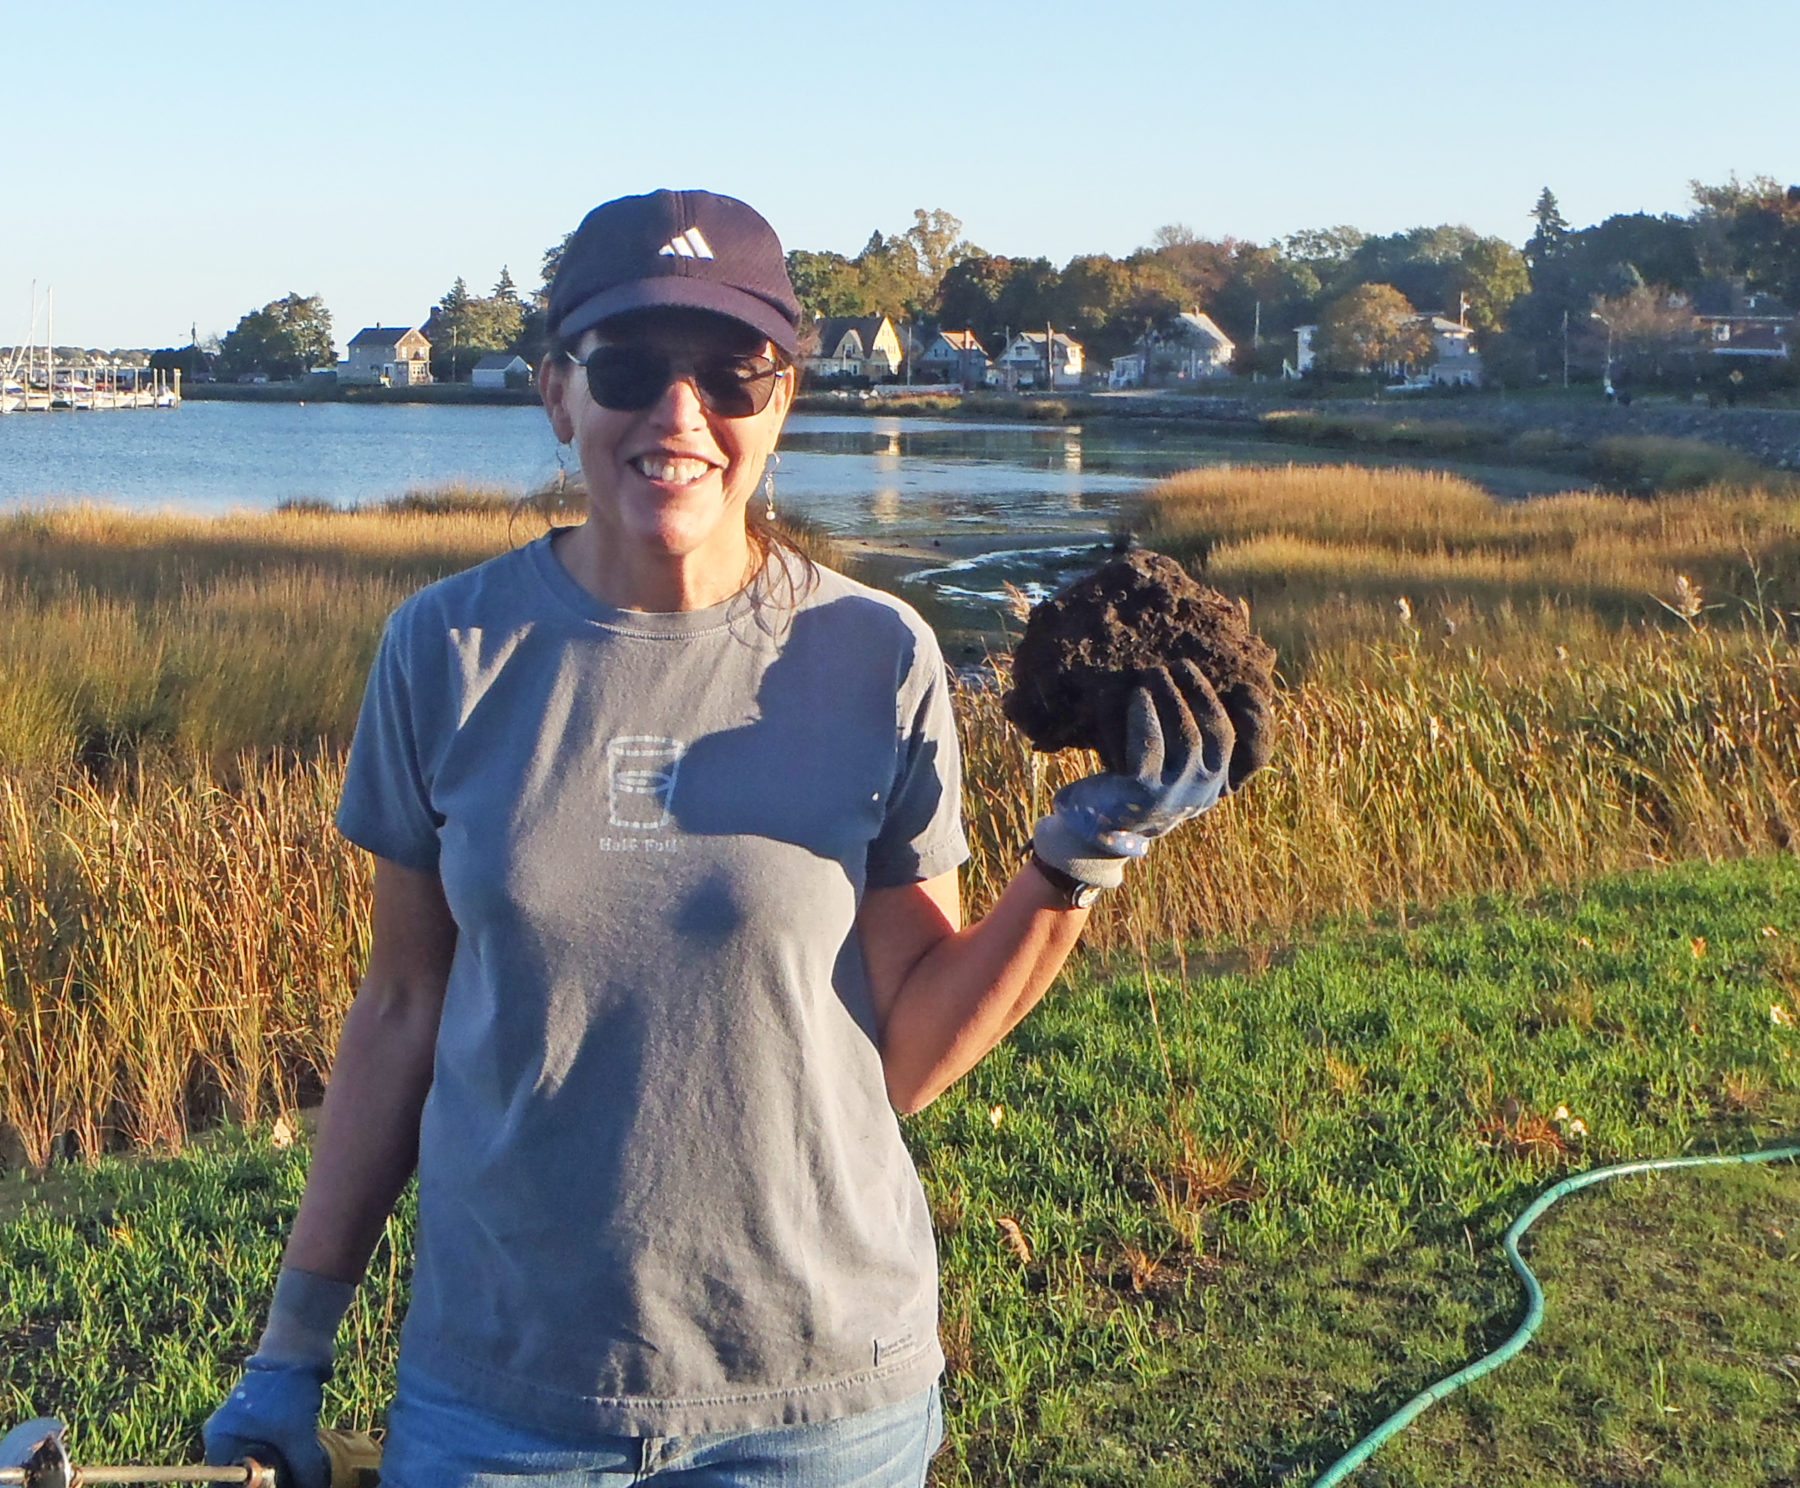 Barbara Rubine, shown here, was recognized in 2018 with Save The Bay's Alison J. Walsh Award for Outstanding Environmental Advocacy